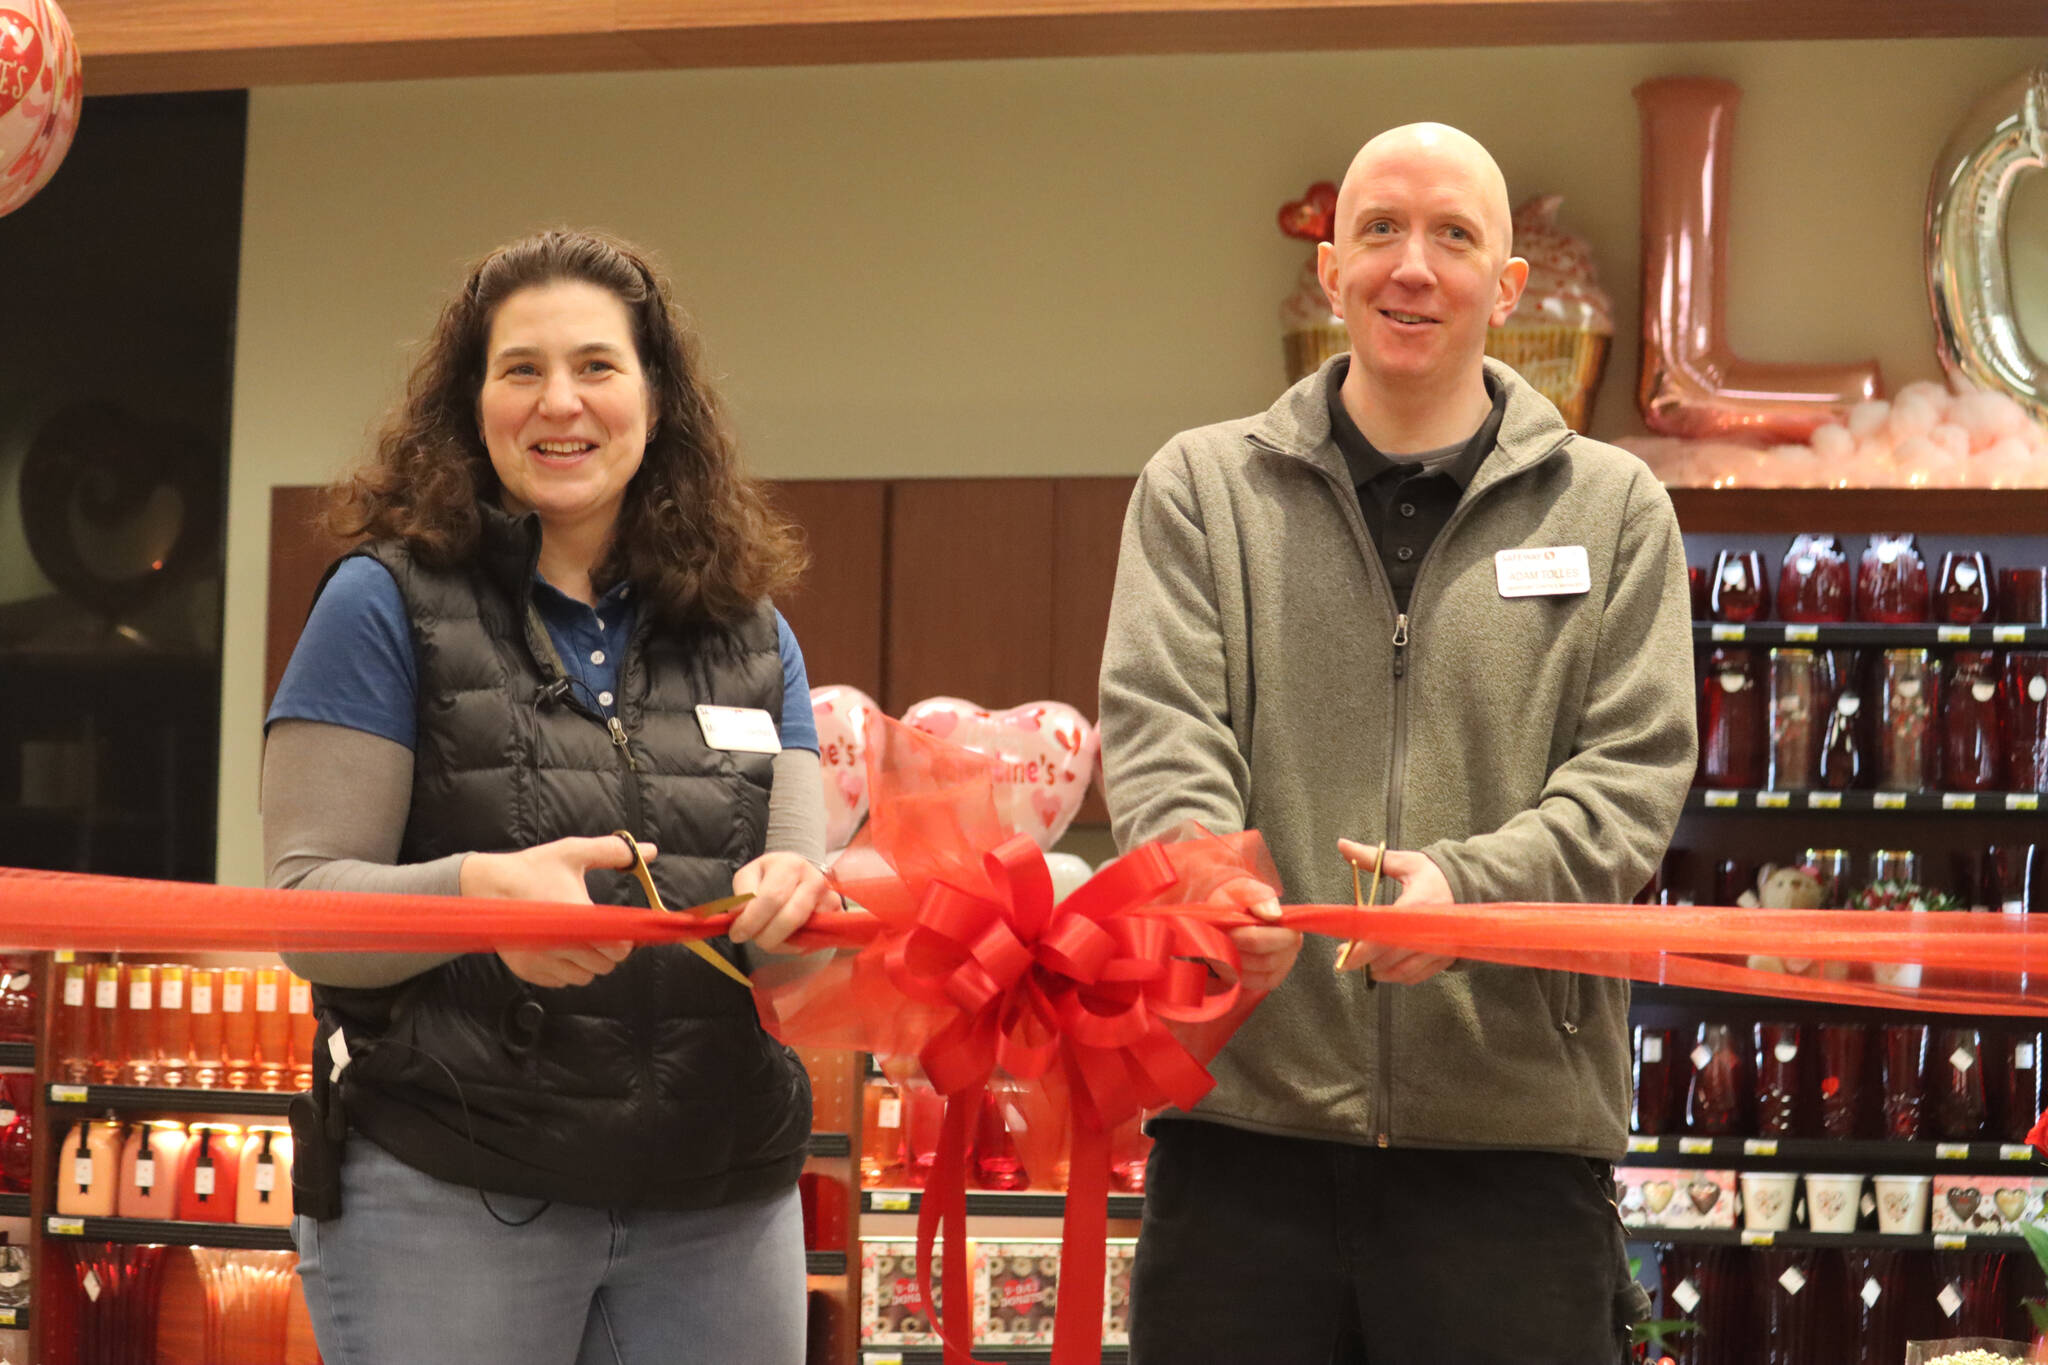 Safeway grocery manager Michelle Lecorchick and inventory control manager Adam Tolles cut the red ribbon during Wednesday’s grand reopening ceremony for the store’s Juneau location. (Jonson Kuhn / Juneau Empire)